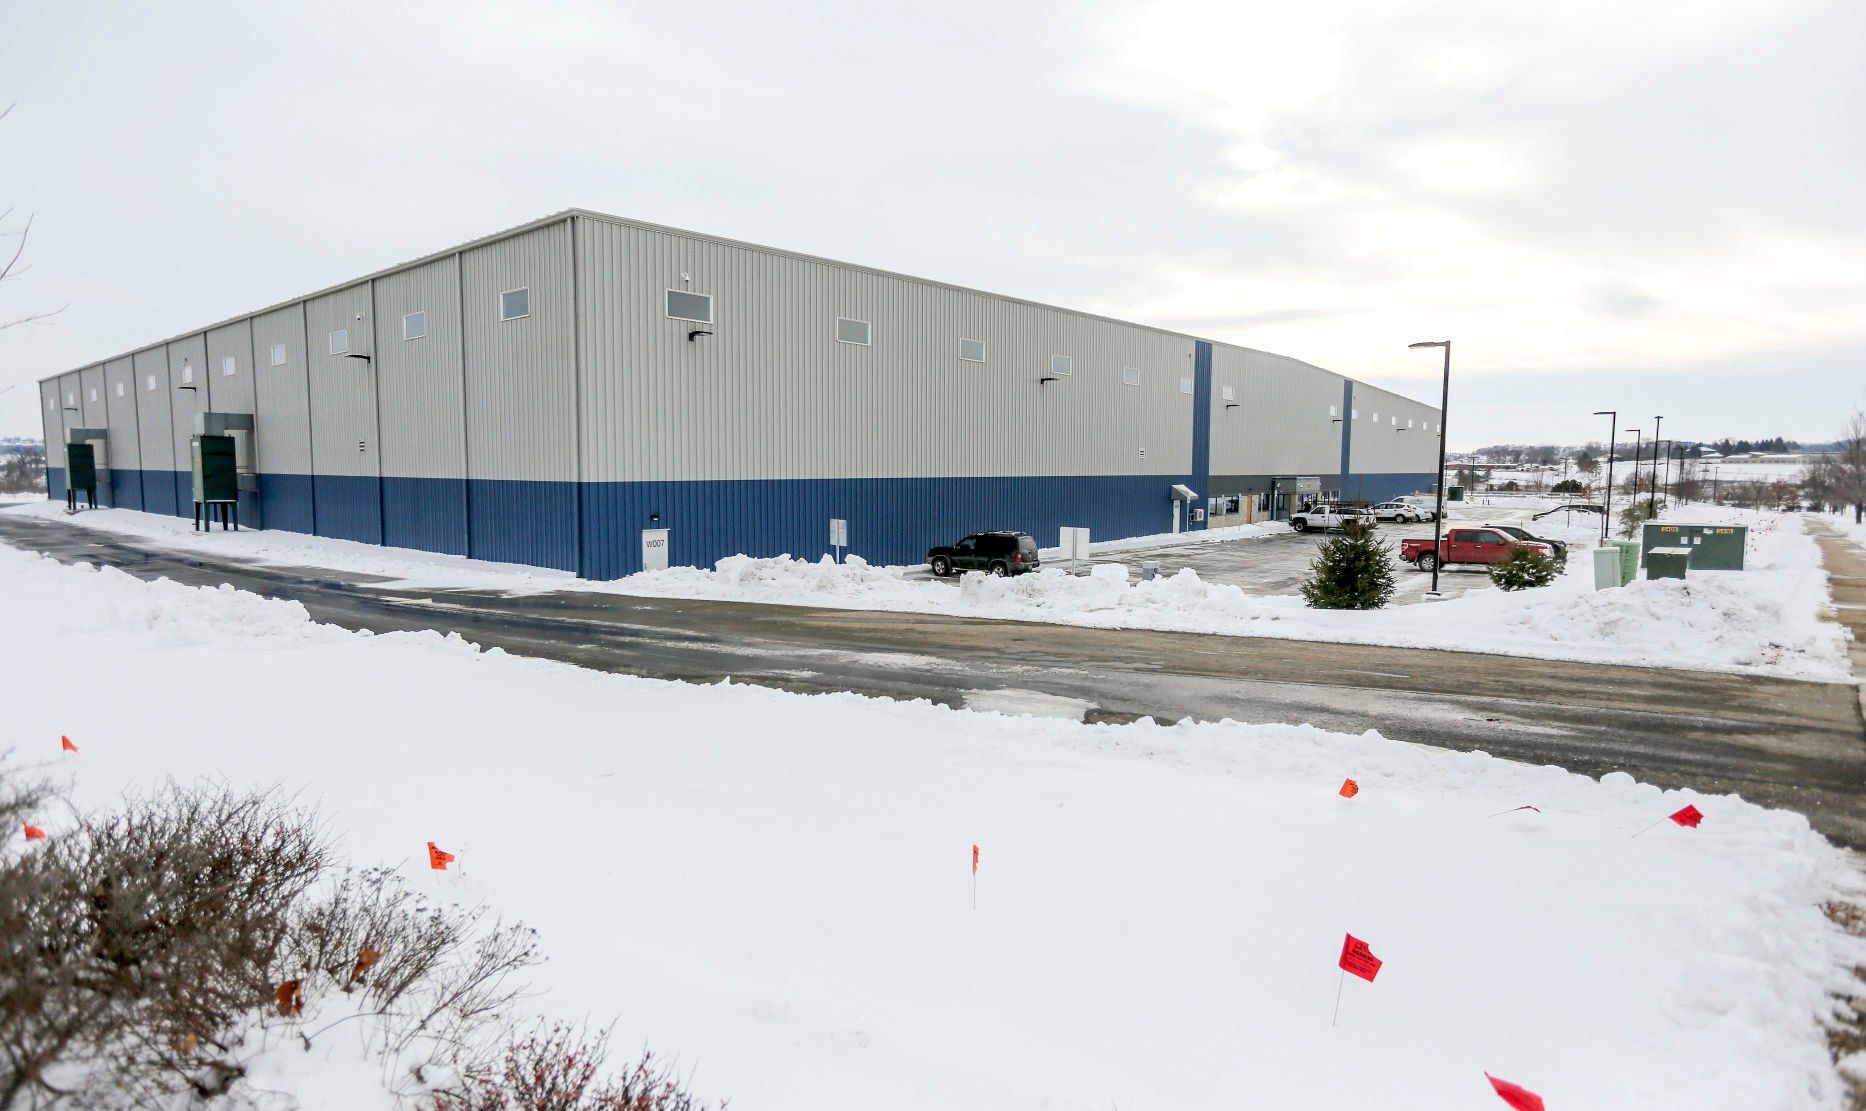 A warehouse at 7200 Chavenelle Road now houses an Amazon distribution facility.    PHOTO CREDIT: Dave Kettering